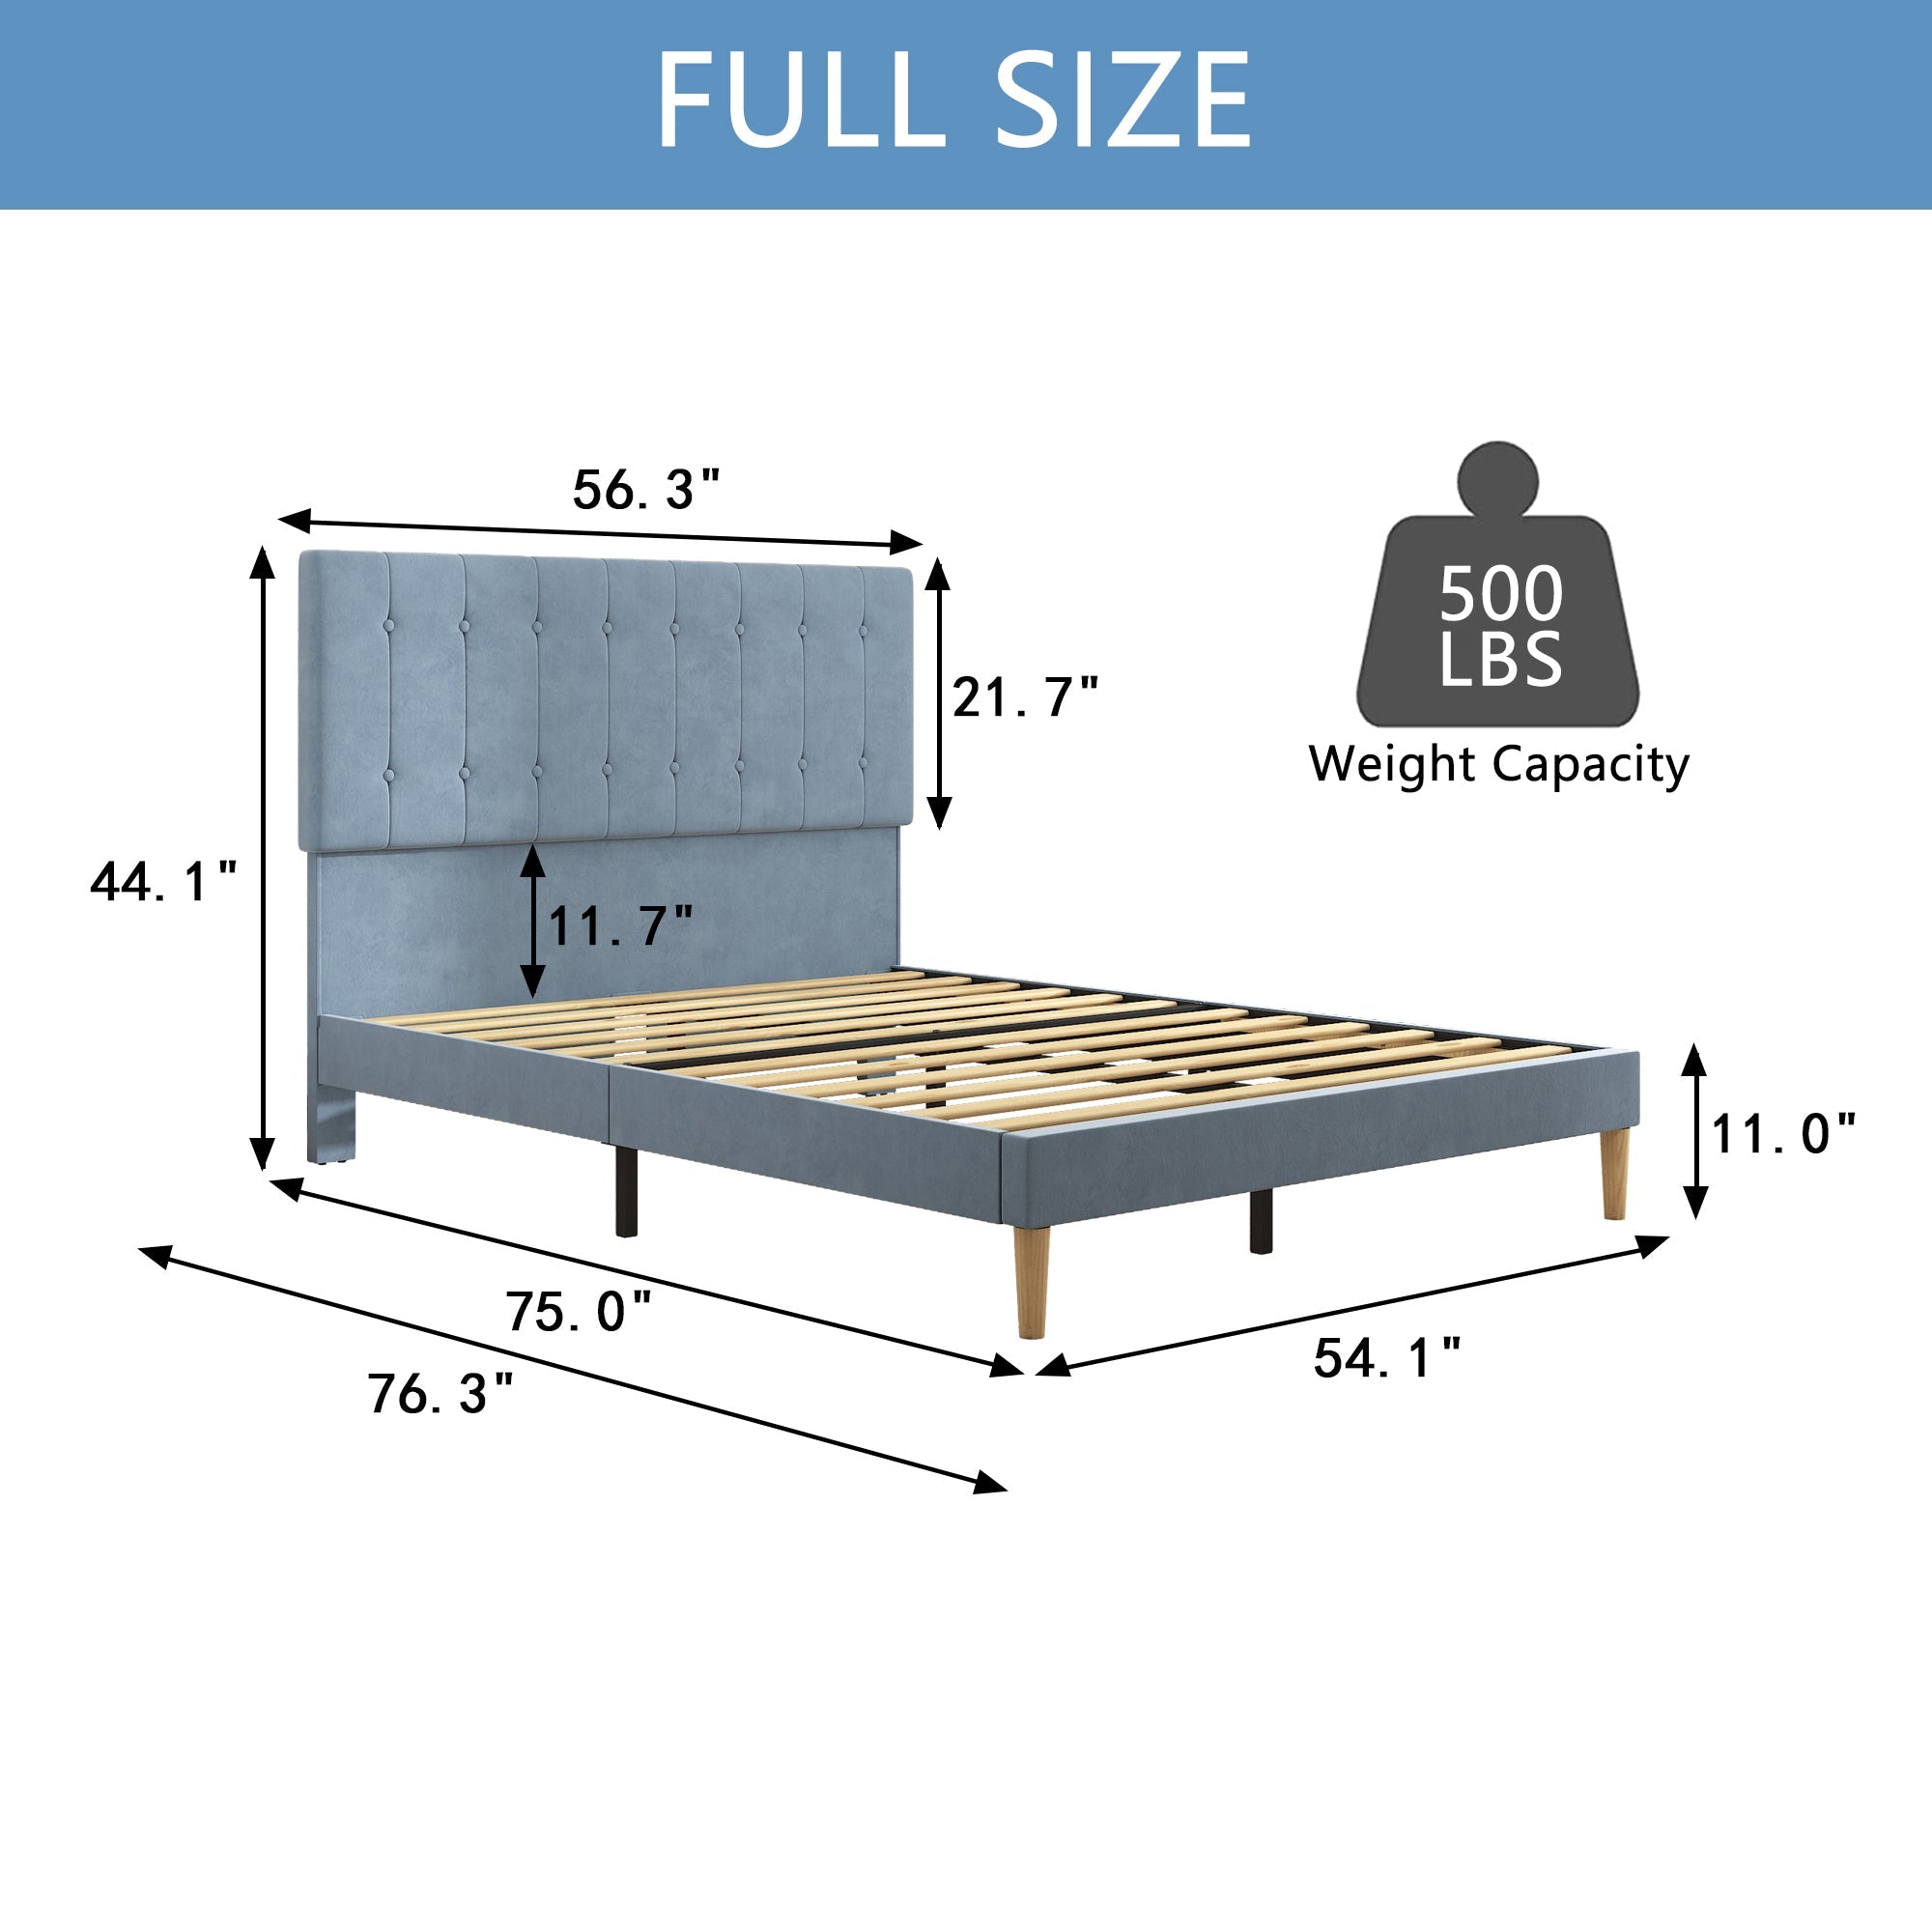 Blue Full Bed Frame for Adults Kids, Modern Fabric Upholstered Platform Bed Frame with Headboard, Full Size Bed Frame Bedroom Furniture with Wood Slats Support, No Box Spring Needed